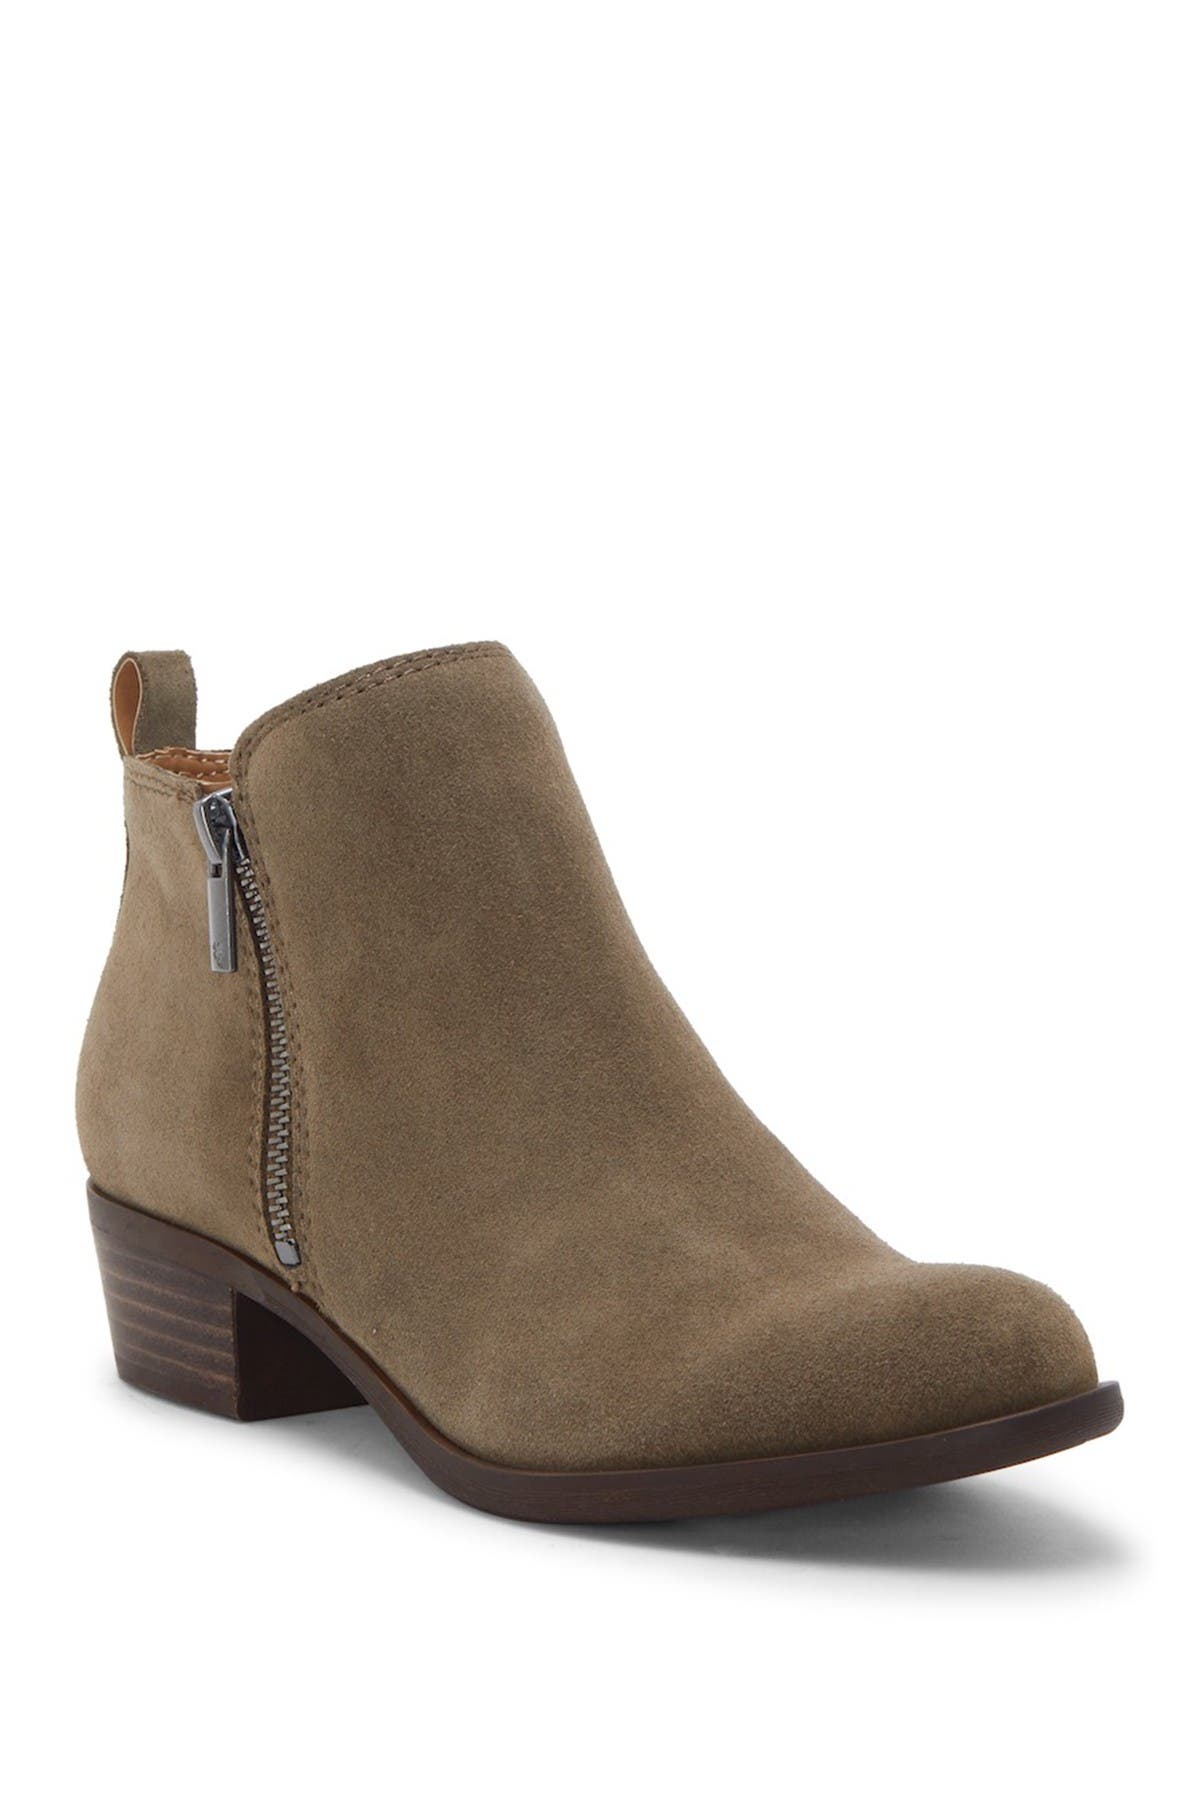 lucky brand basel shearling bootie